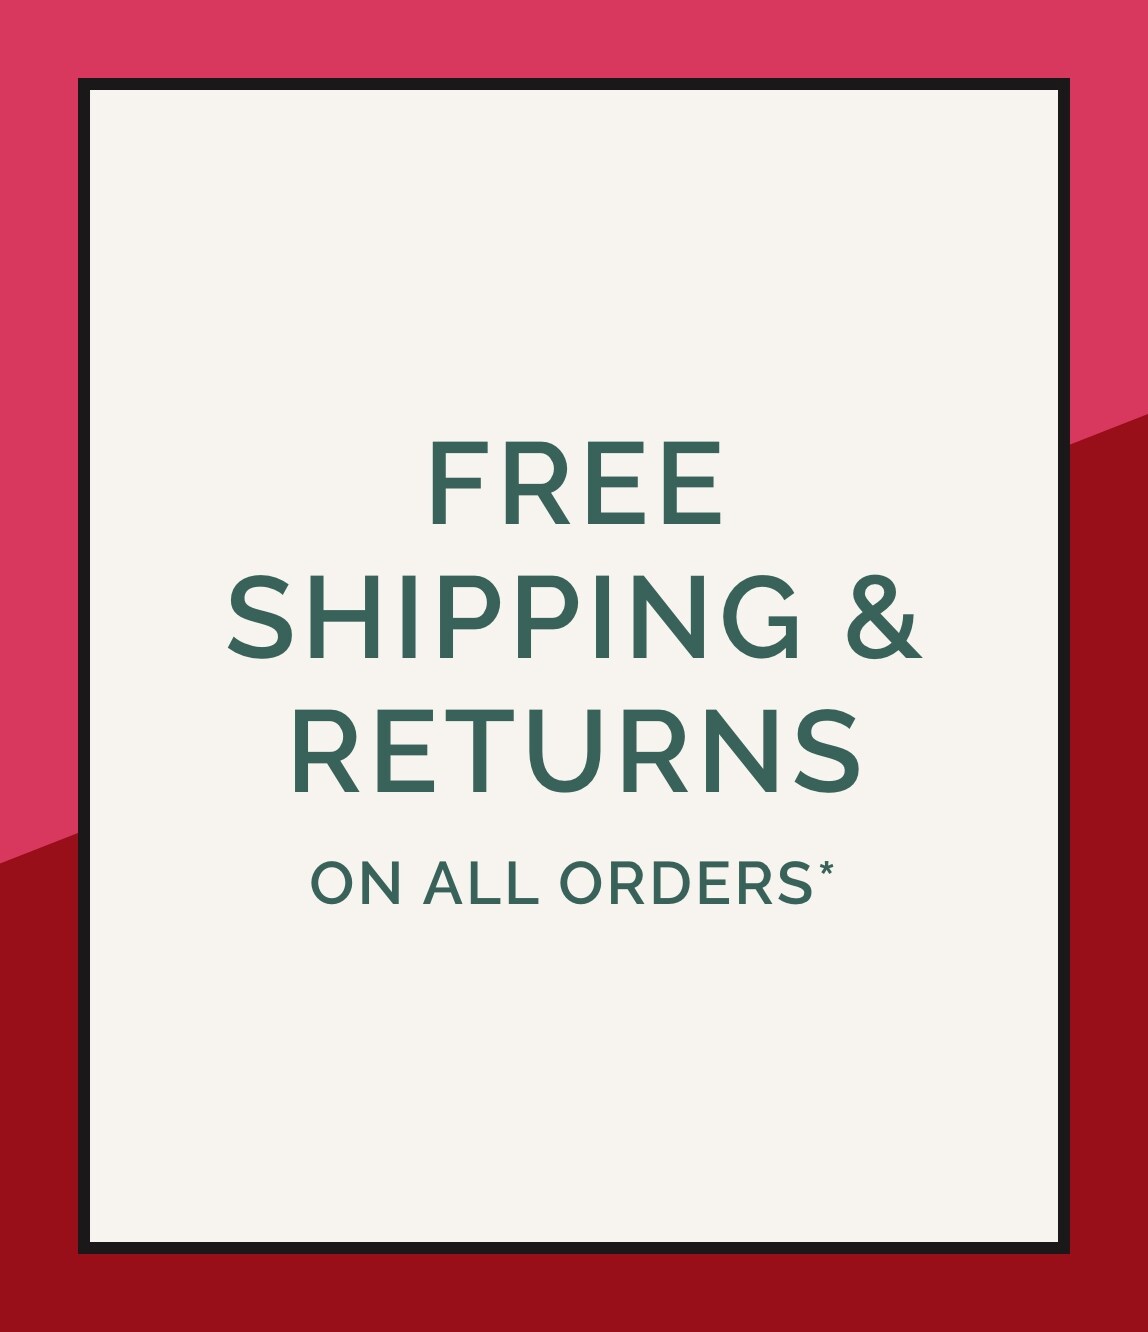 FREE SHIPPING ON ALL ORDERS